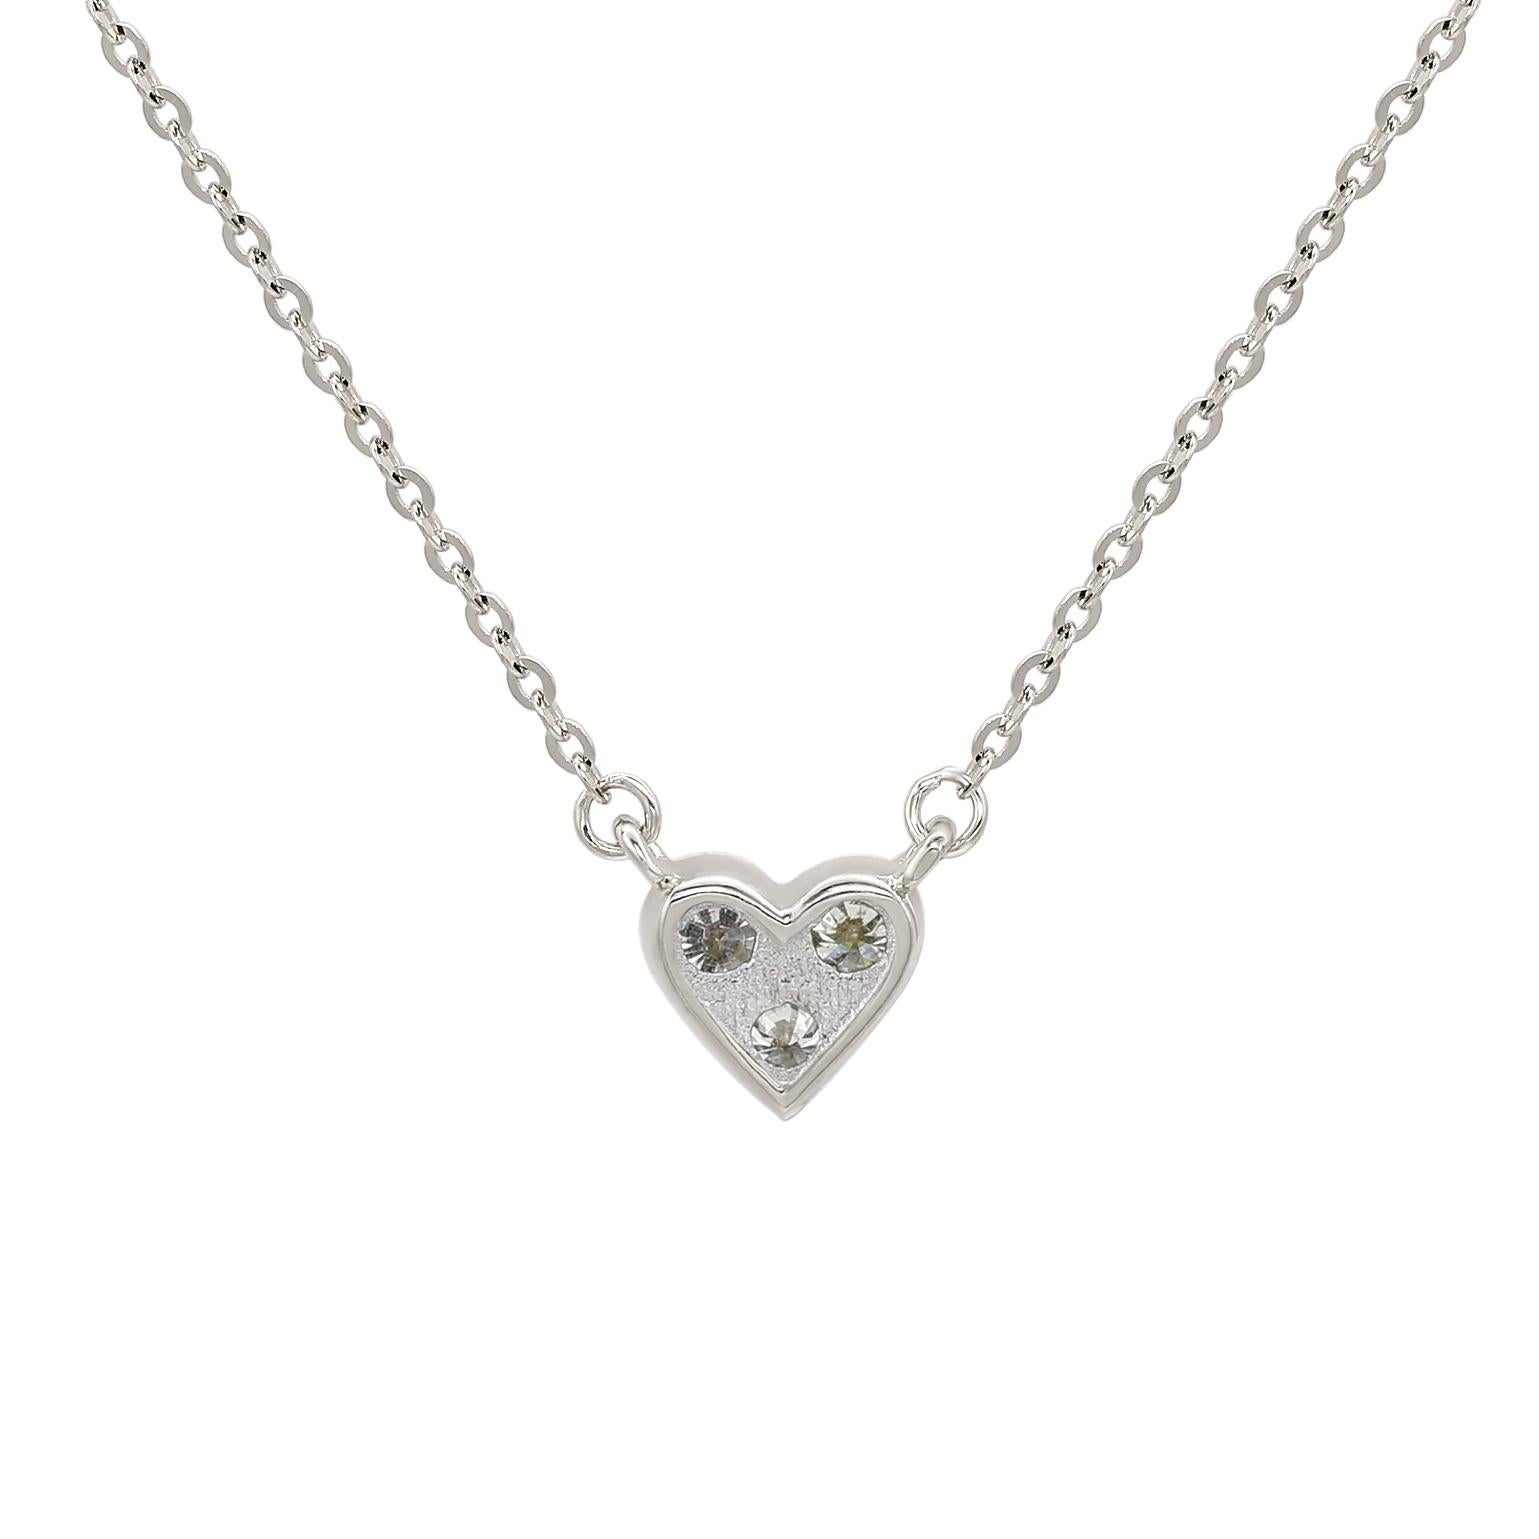 Add an elegant accent to your outfit with this sparkling Suzy Levian heart shape necklace featuring 3 round cut gorgeous white diamonds in a prong setting. The sparkling diamonds are hand set in 14-karat white gold, and weigh 0.18 cttw and are g-h,